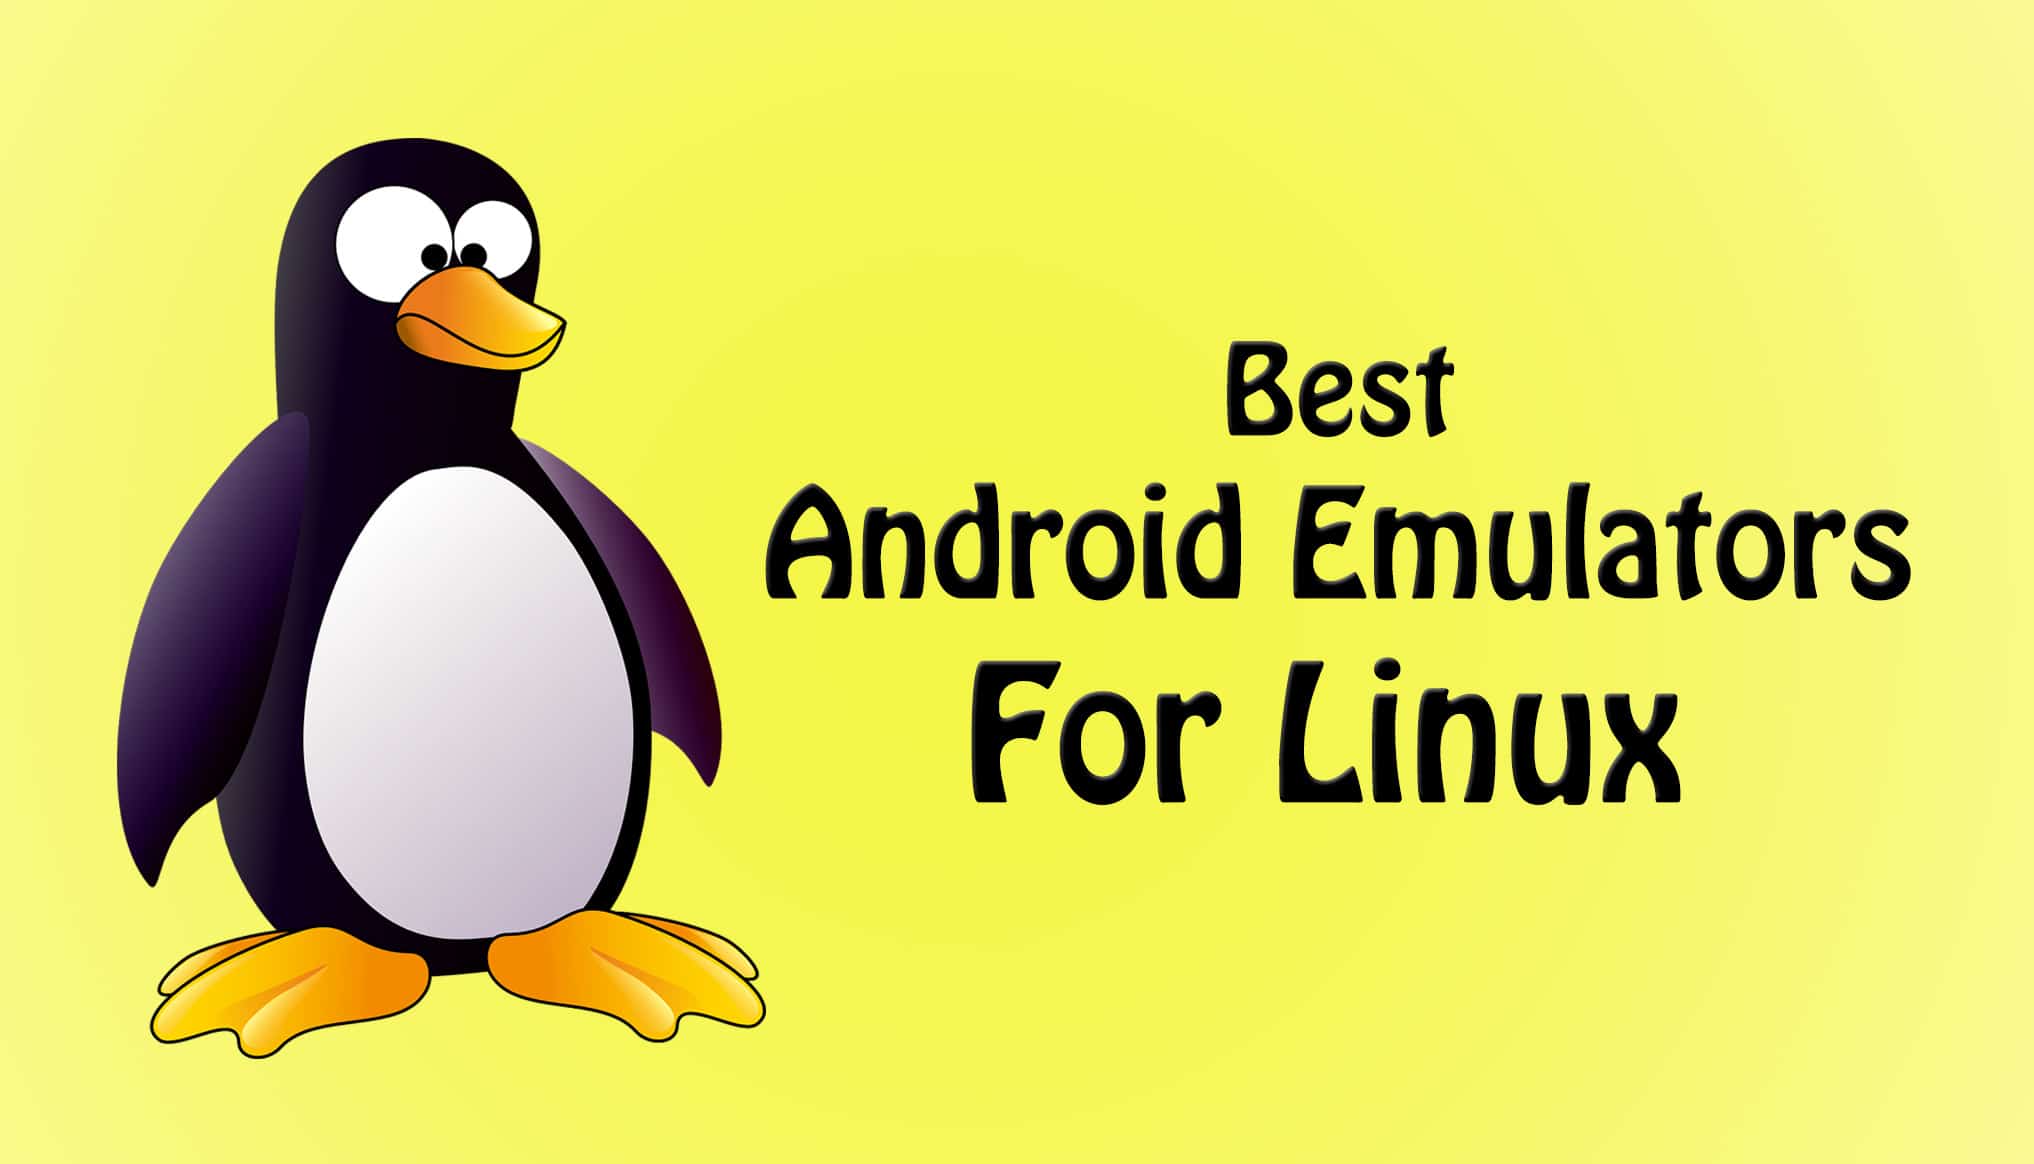 Linux Android Emulator